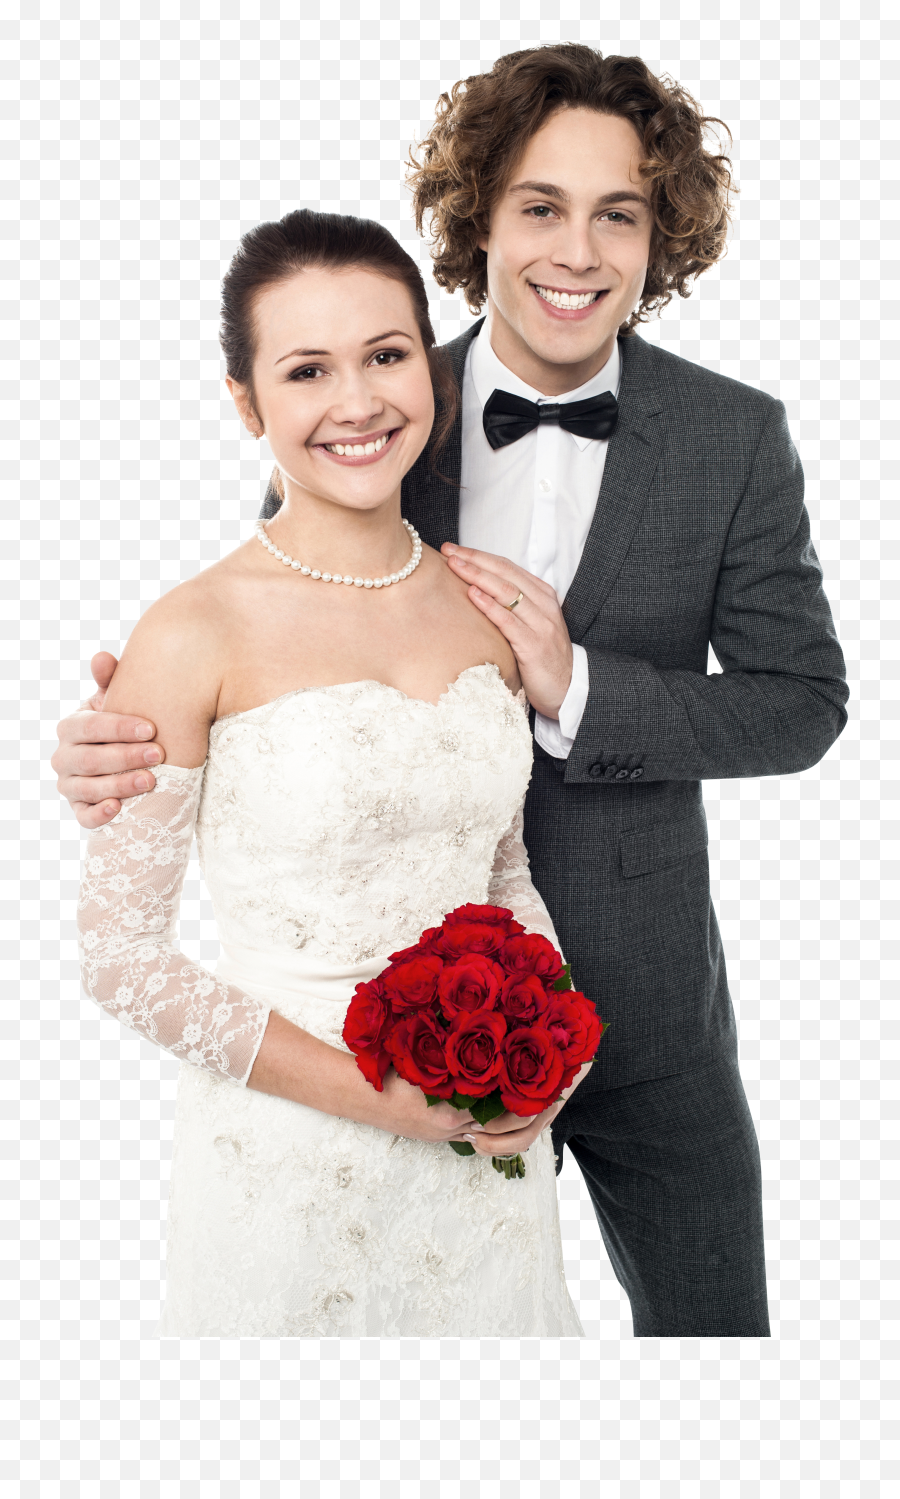 Download Wedding Couple Png Image For Free Married